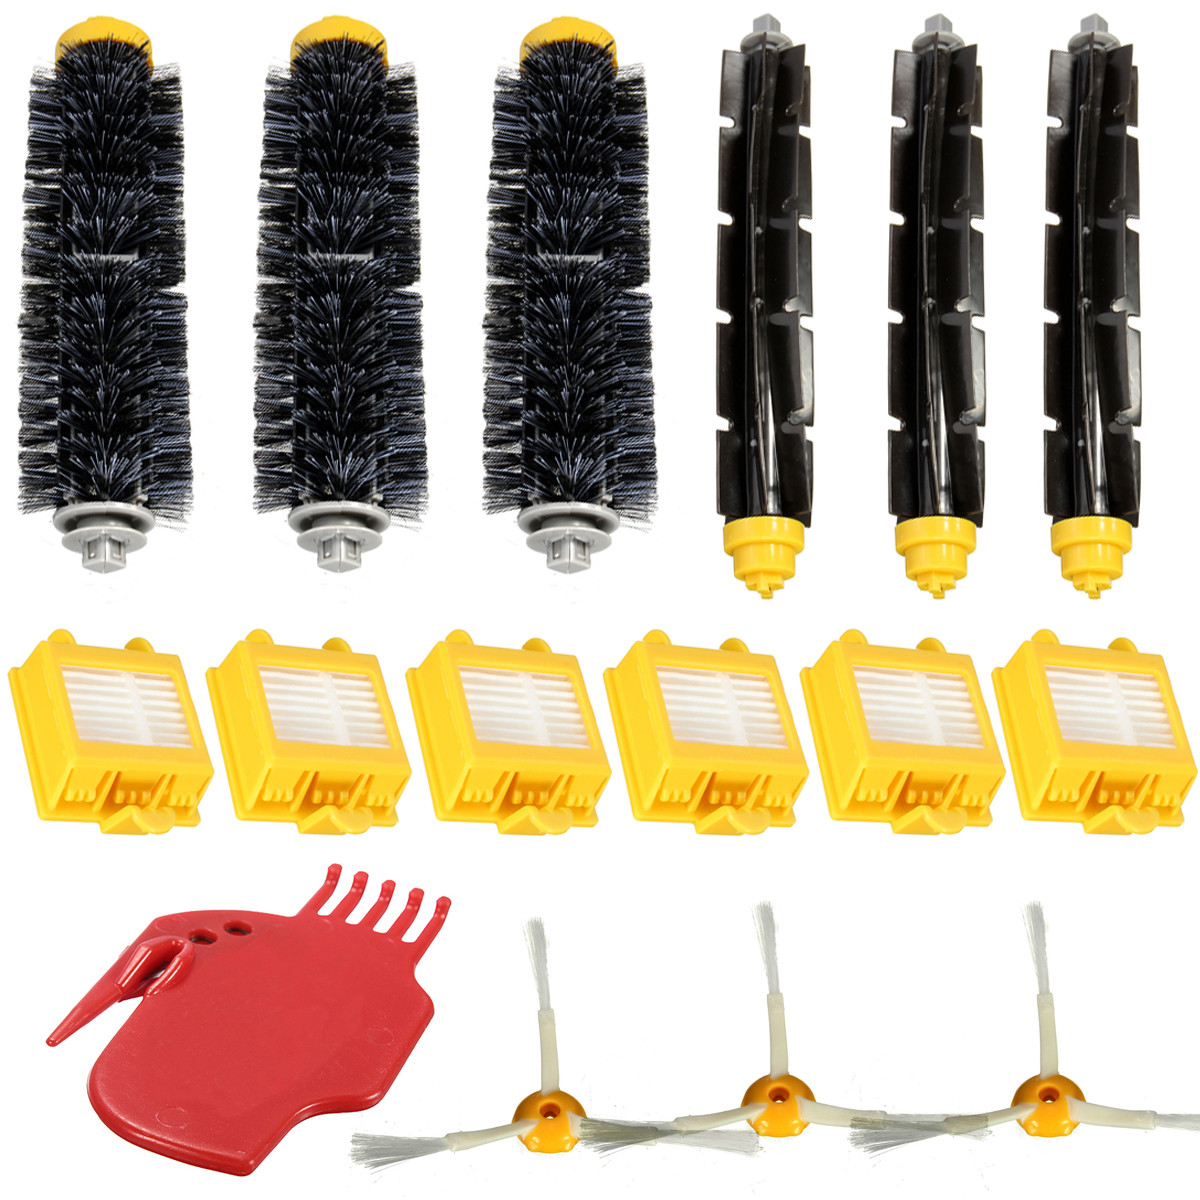 

16Pcs Hepa Filters Brush Pack Replacement Kit 3 Armed for iRobot Roomba 700 Series 760 770 780